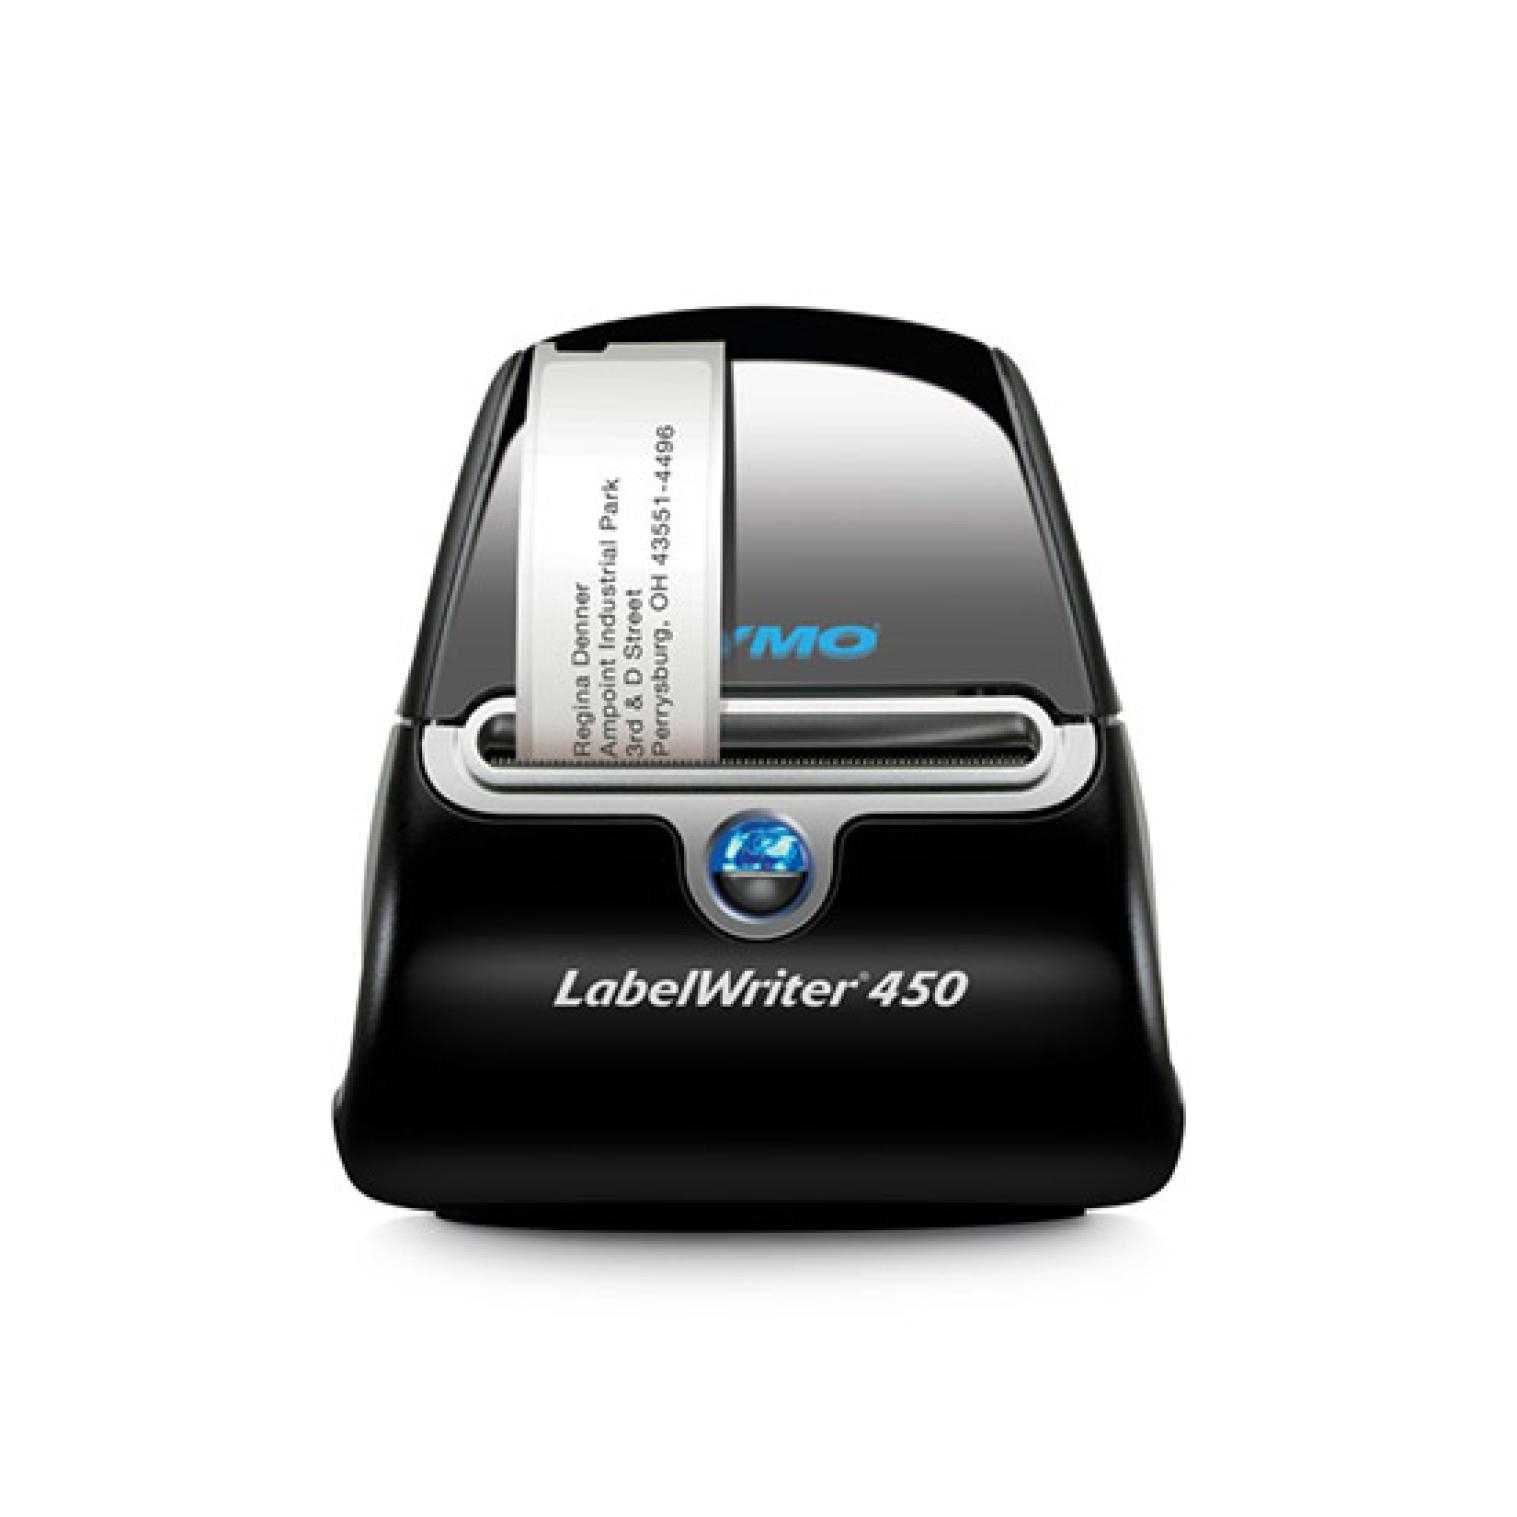 Dymo Labelwriter 450 Review | Pcmag Regarding Dymo Label Templates For Word